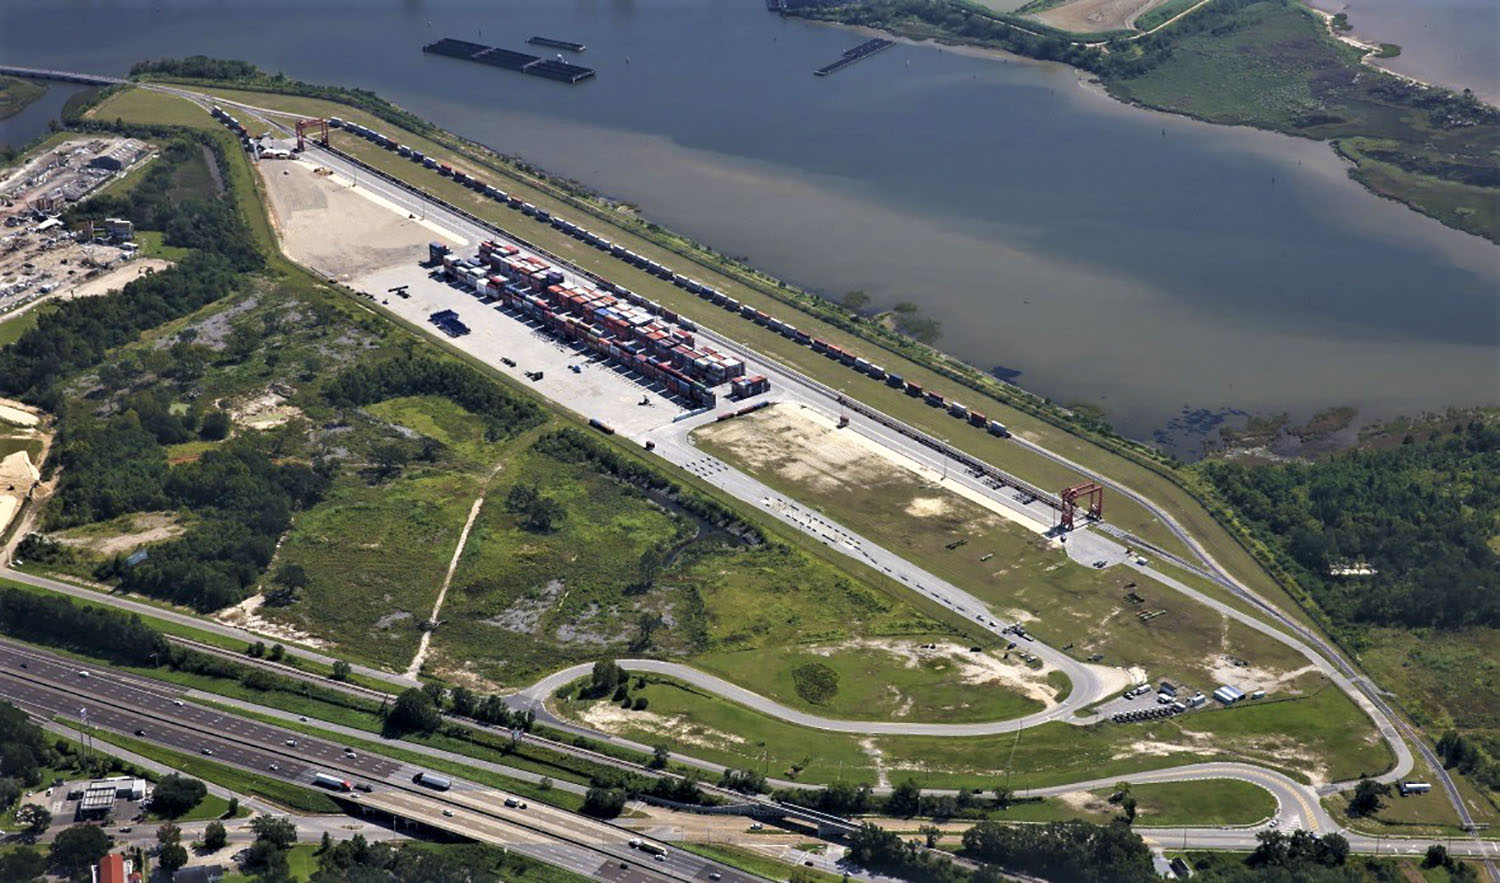 Alabama Port Authority's existing intermodal container transfer facility at Mobile. (Photo courtesy of Alabama Port Authority)